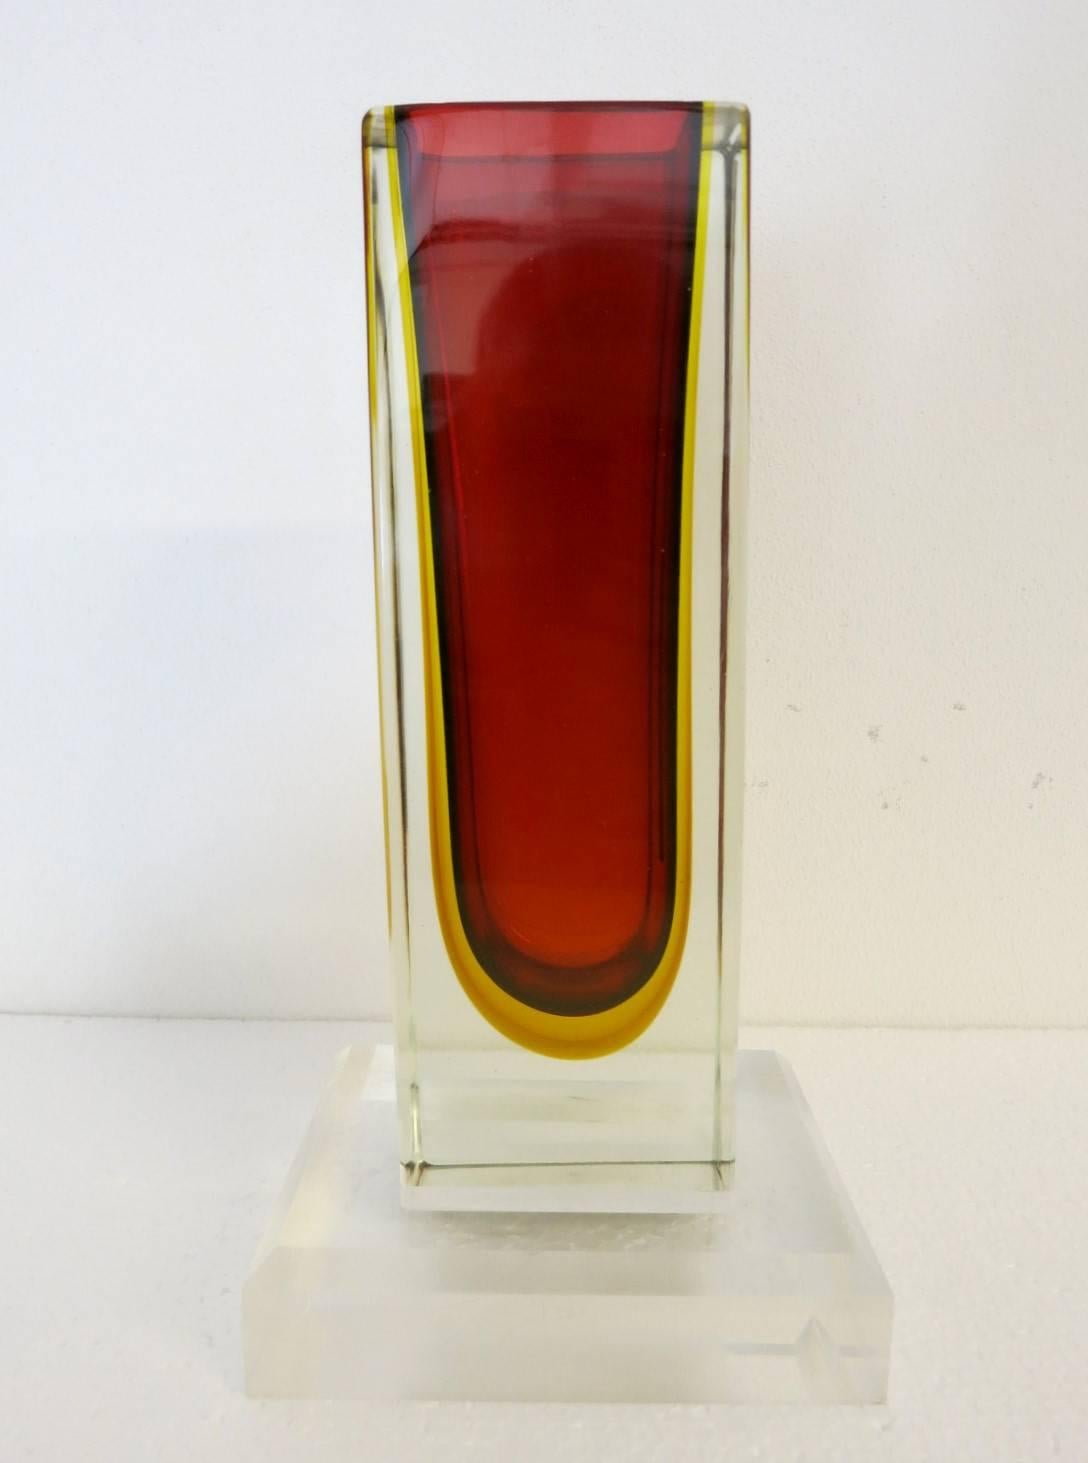 Vintage Italian faceted red Murano glass vase blown in Sommerso technique on lucite base 
Designed by Mandruzzato circa 1960's / Made in Italy 
Vase Dimensions:
Height: 11 inches / Width: 3.5 inches / Depth: 2.5 inches
Lucite Base Dimensions:
Depth: